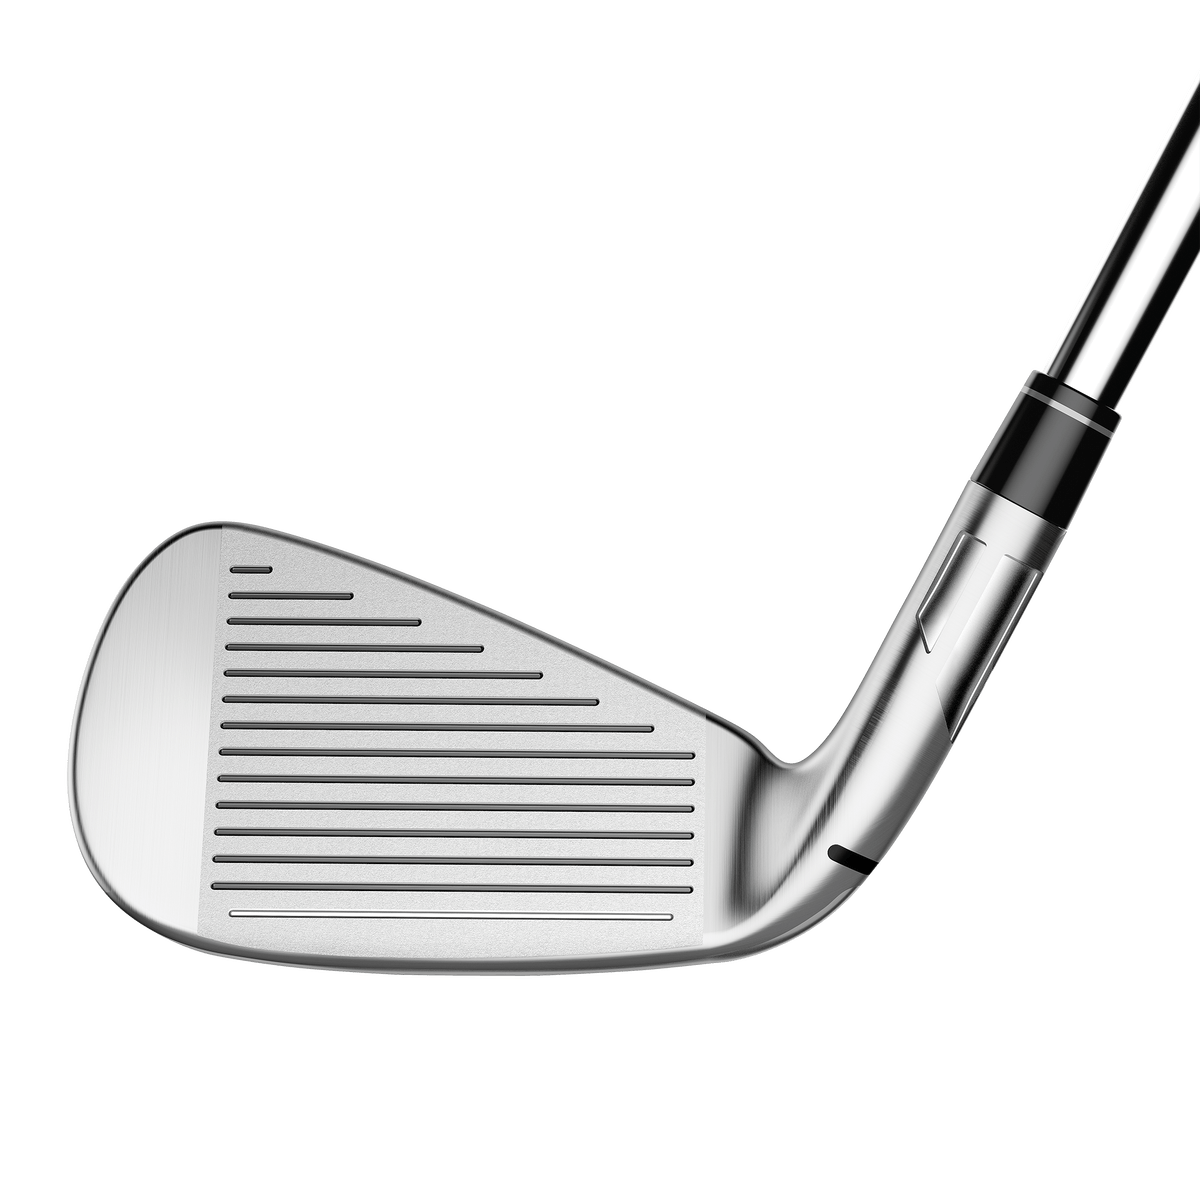 TaylorMade SIM2 Max Irons · Right handed · Graphite · Regular · 5-PW,AW,SW